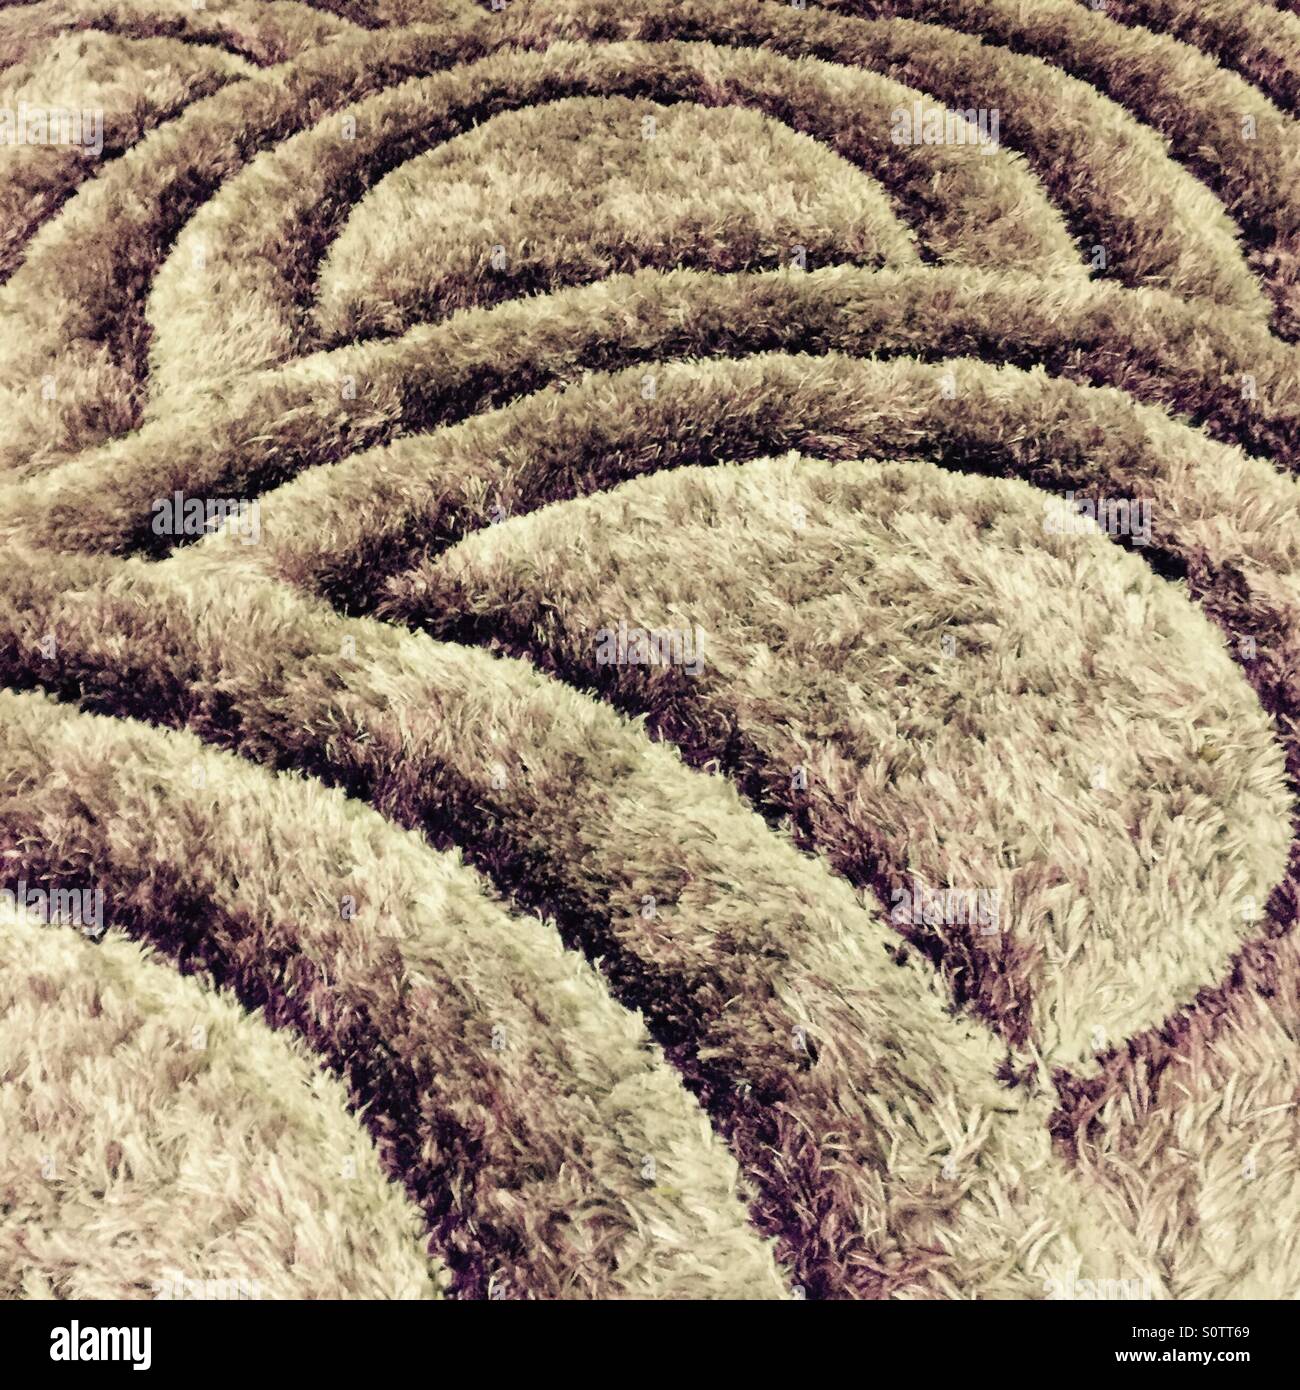 Simple cosy  comforts for heightening the senses- a fuzzy carpet. Stock Photo